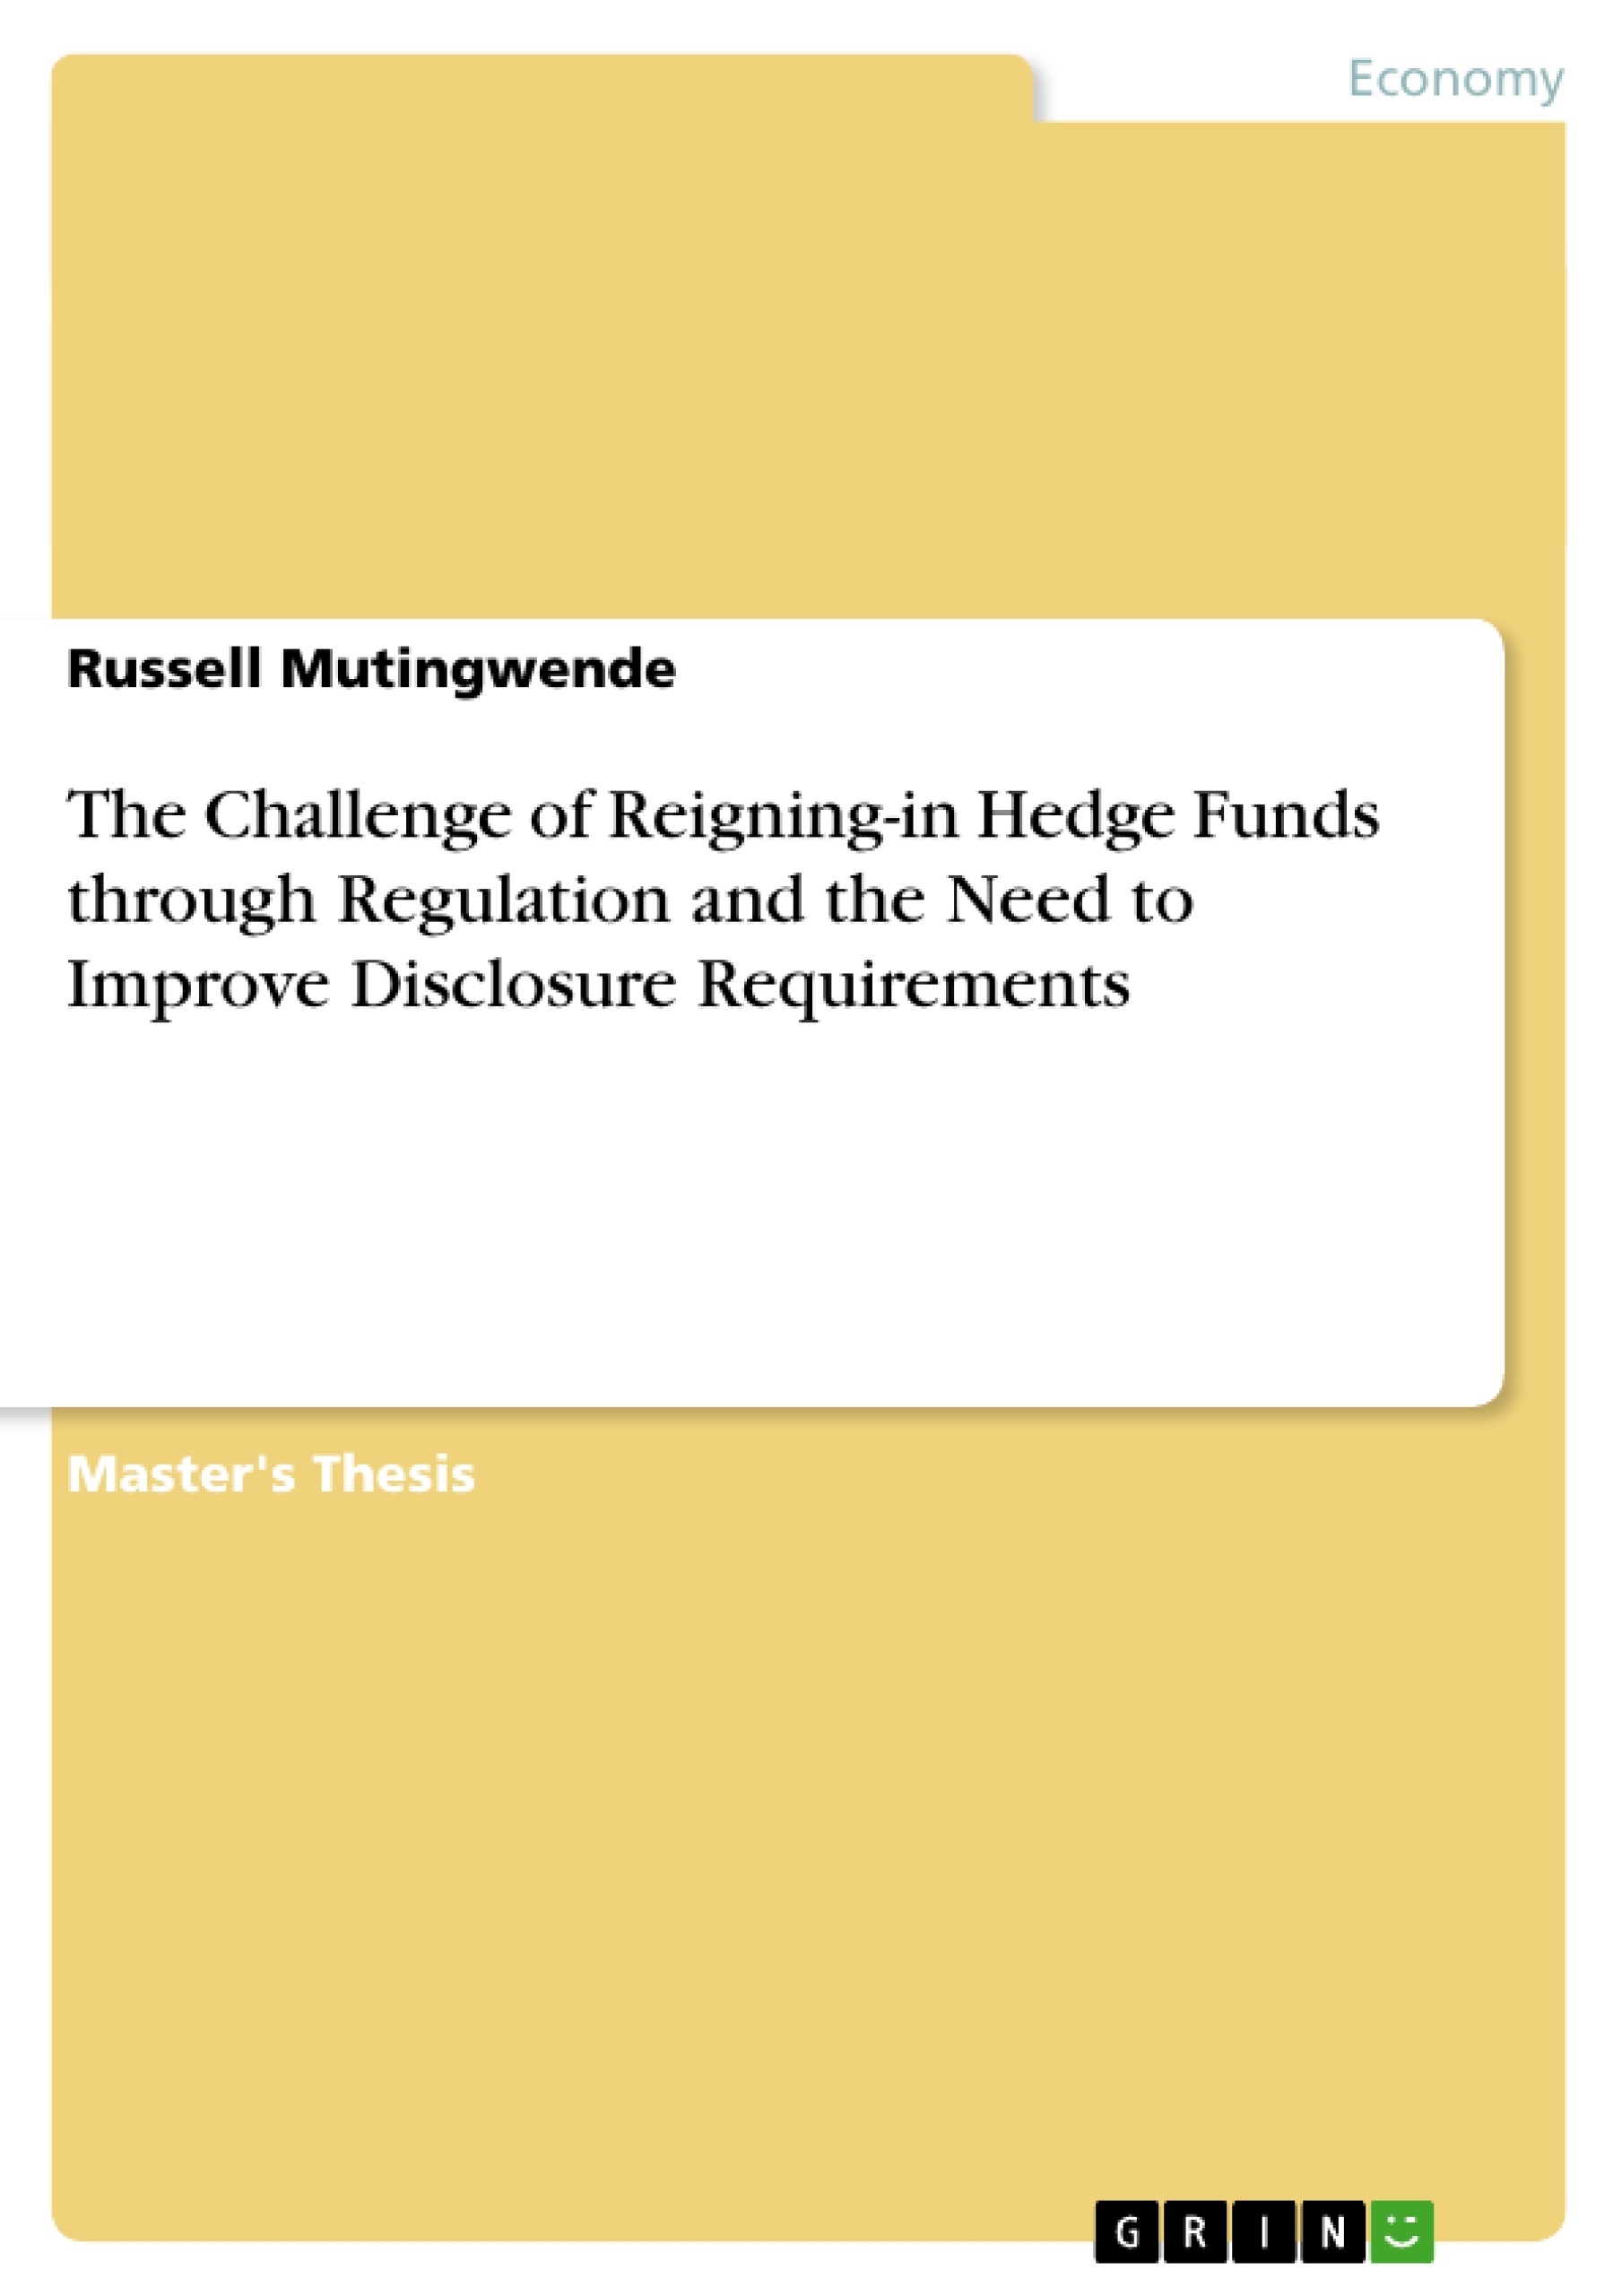 Título: The Challenge of Reigning-in Hedge Funds through Regulation and the Need to Improve Disclosure Requirements